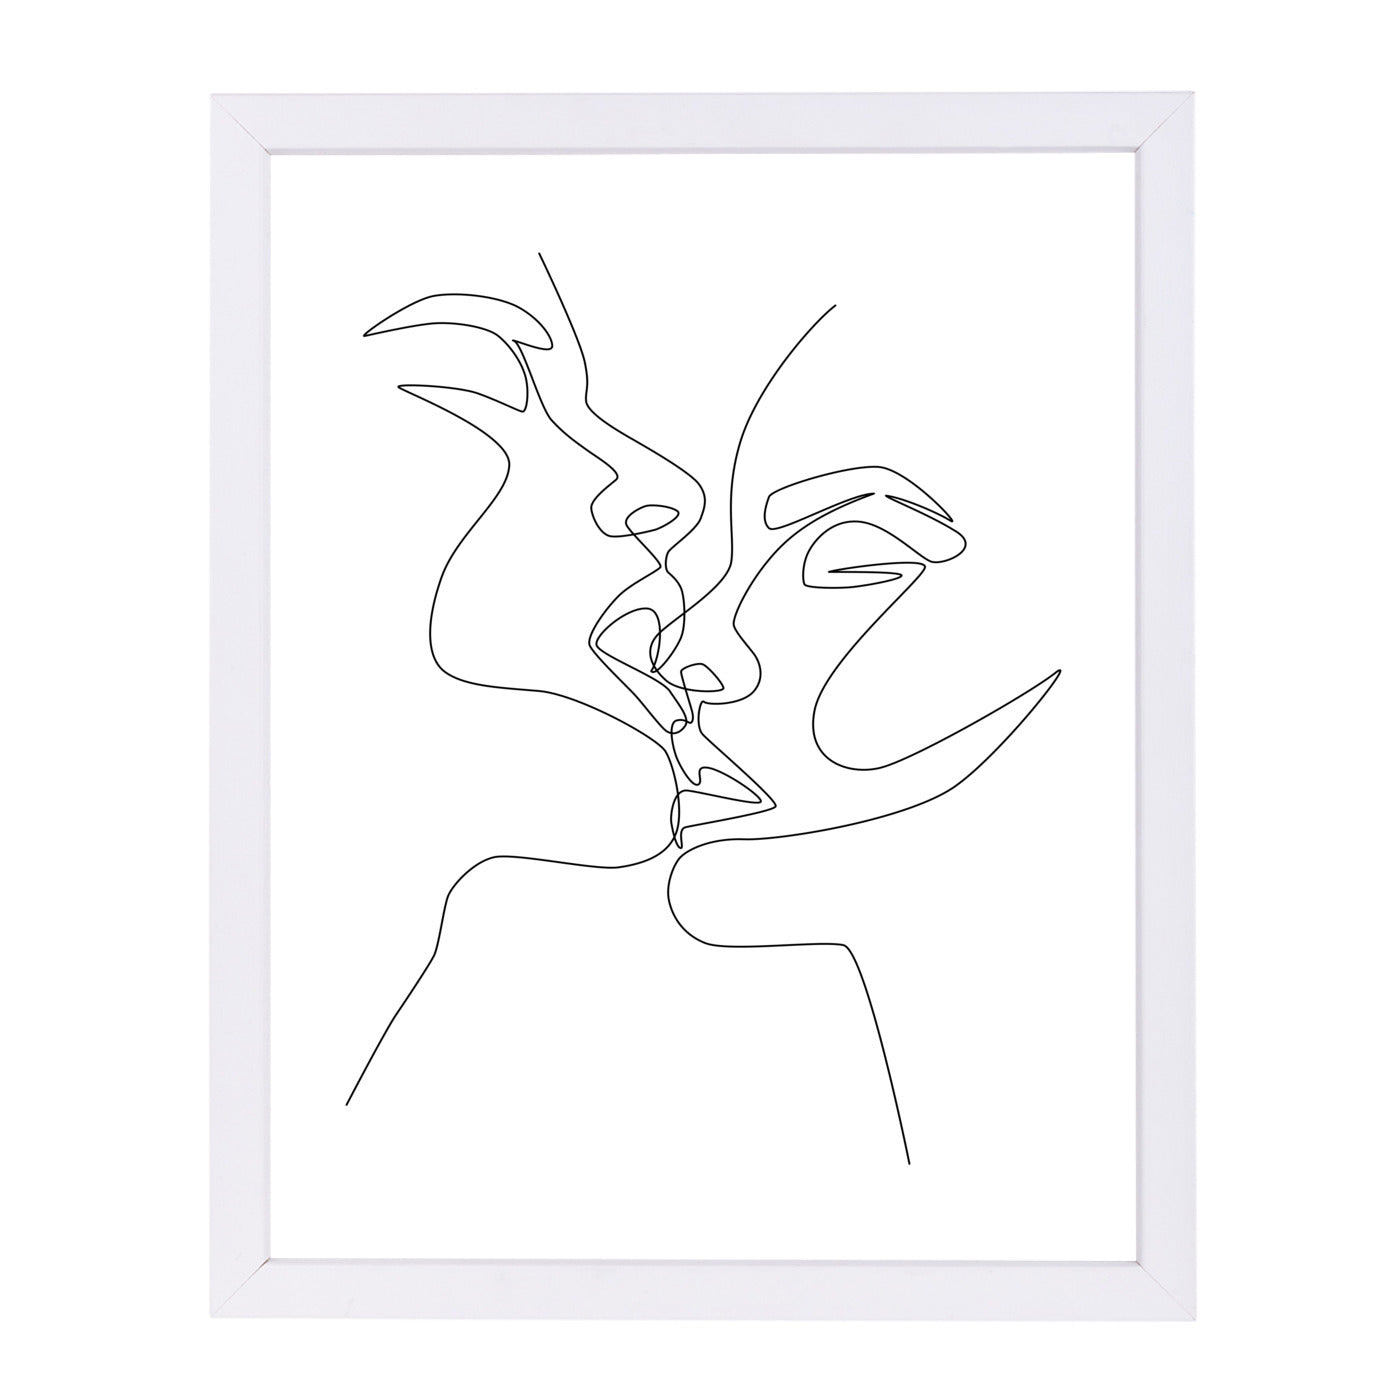 Intense & Intimate by Explicit Design Framed Print - Americanflat